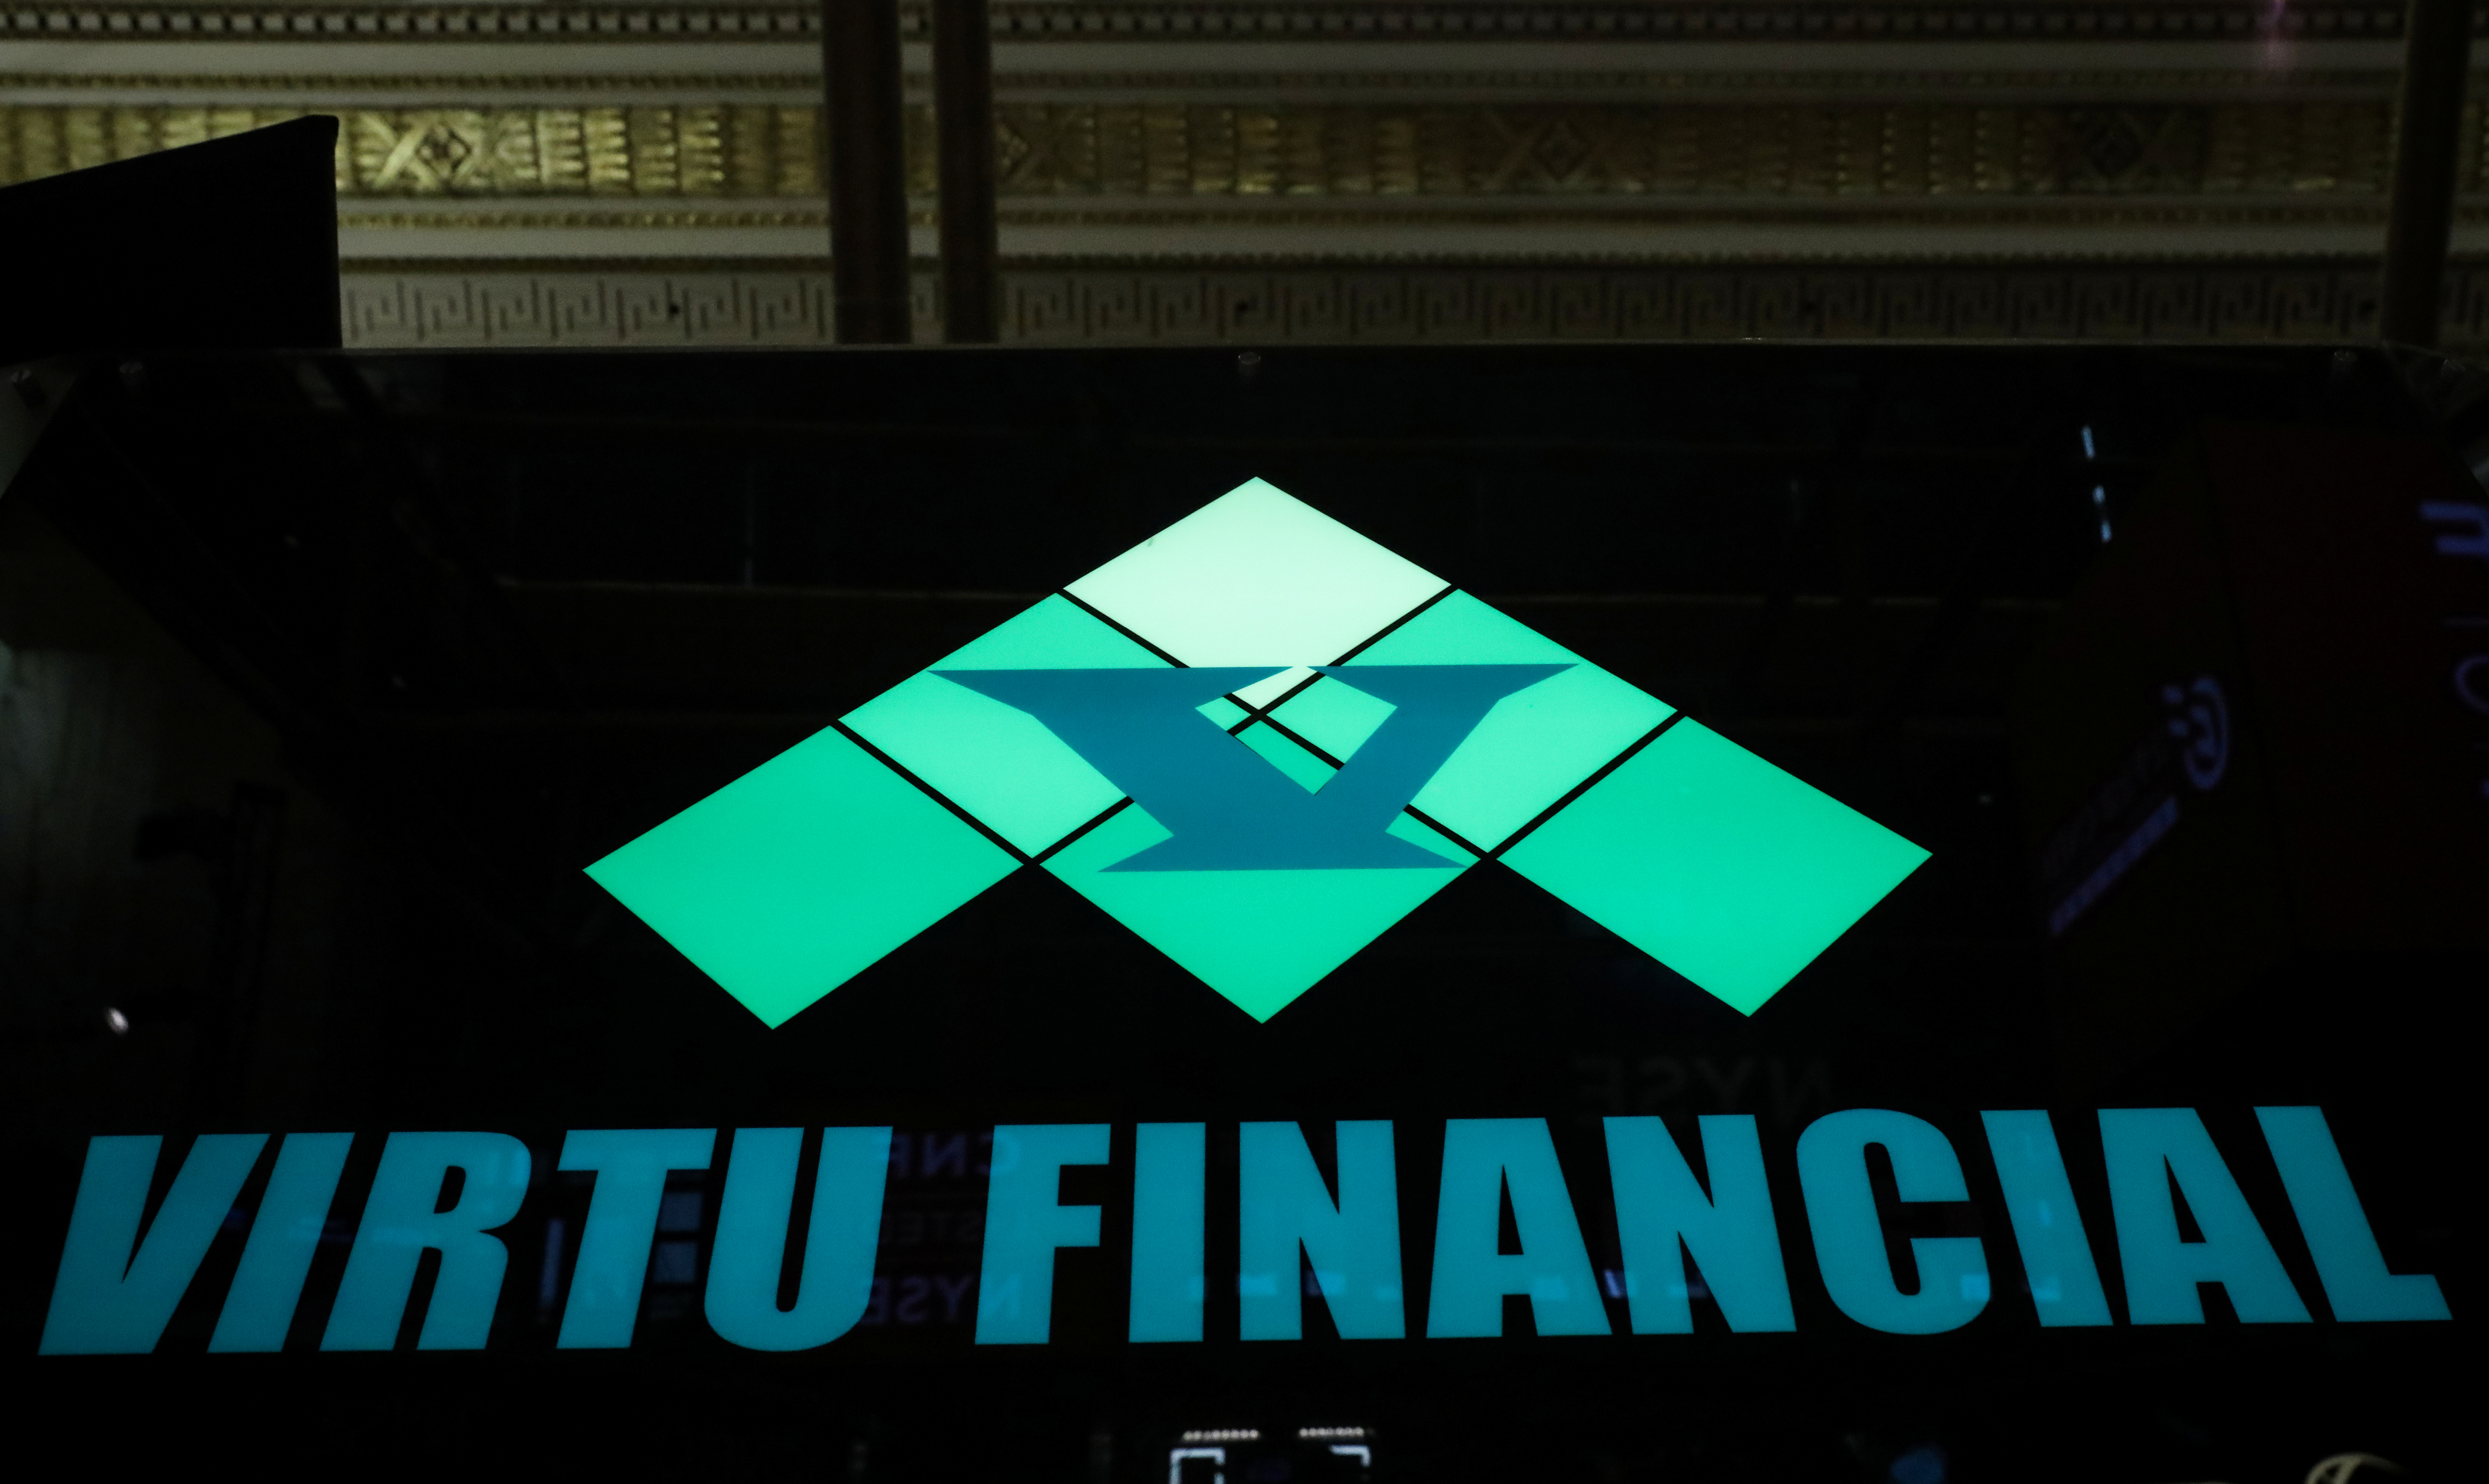 The logo for Virtu Financial Inc. is displayed on a post on the floor of the NYSE in New York